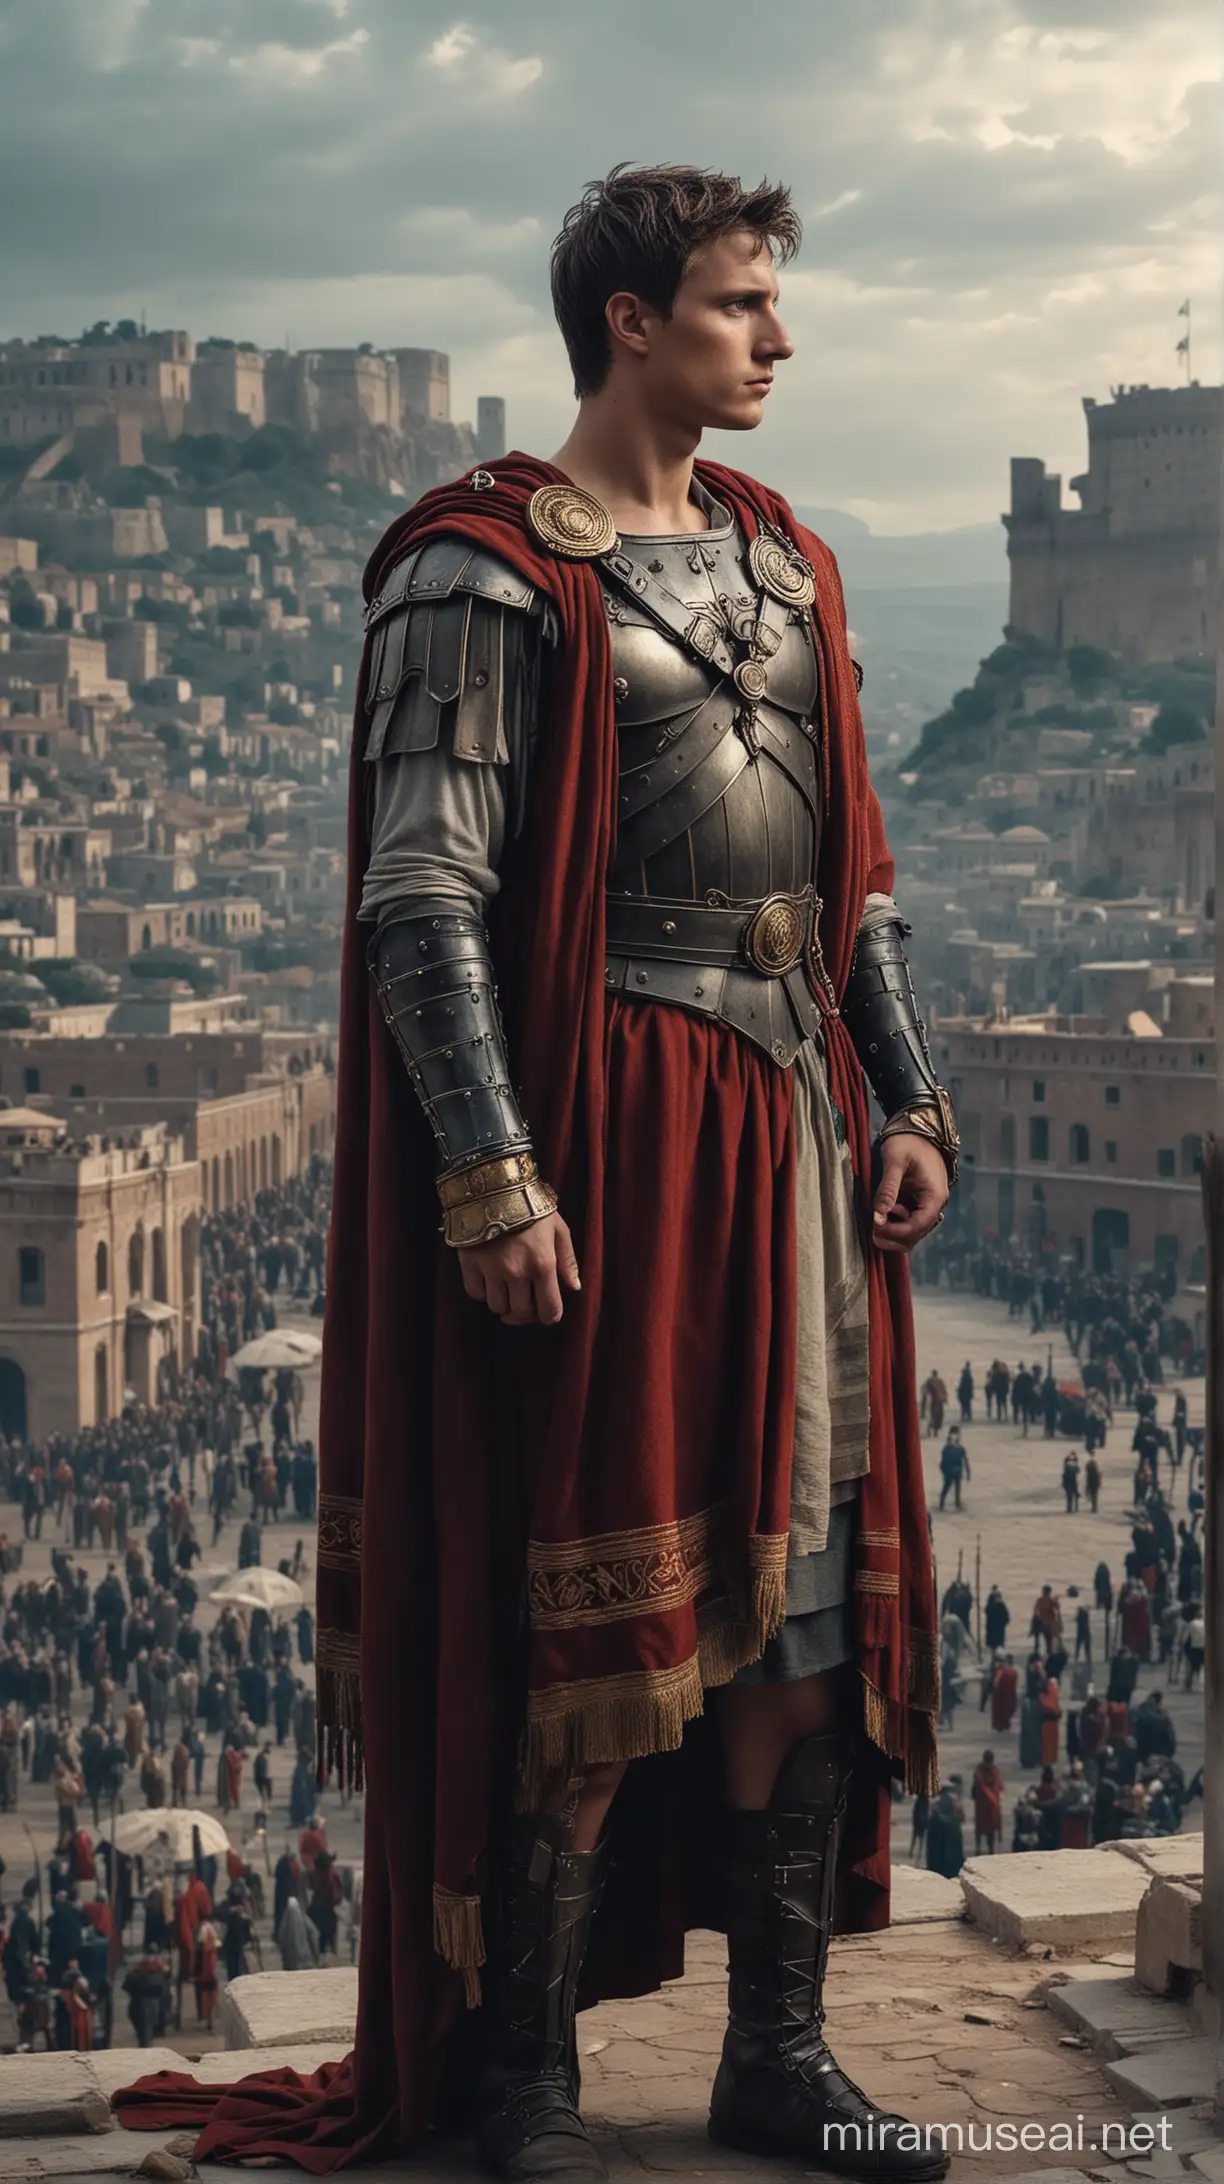 Augustus Majestic Emperor Amidst a Moody Cityscape